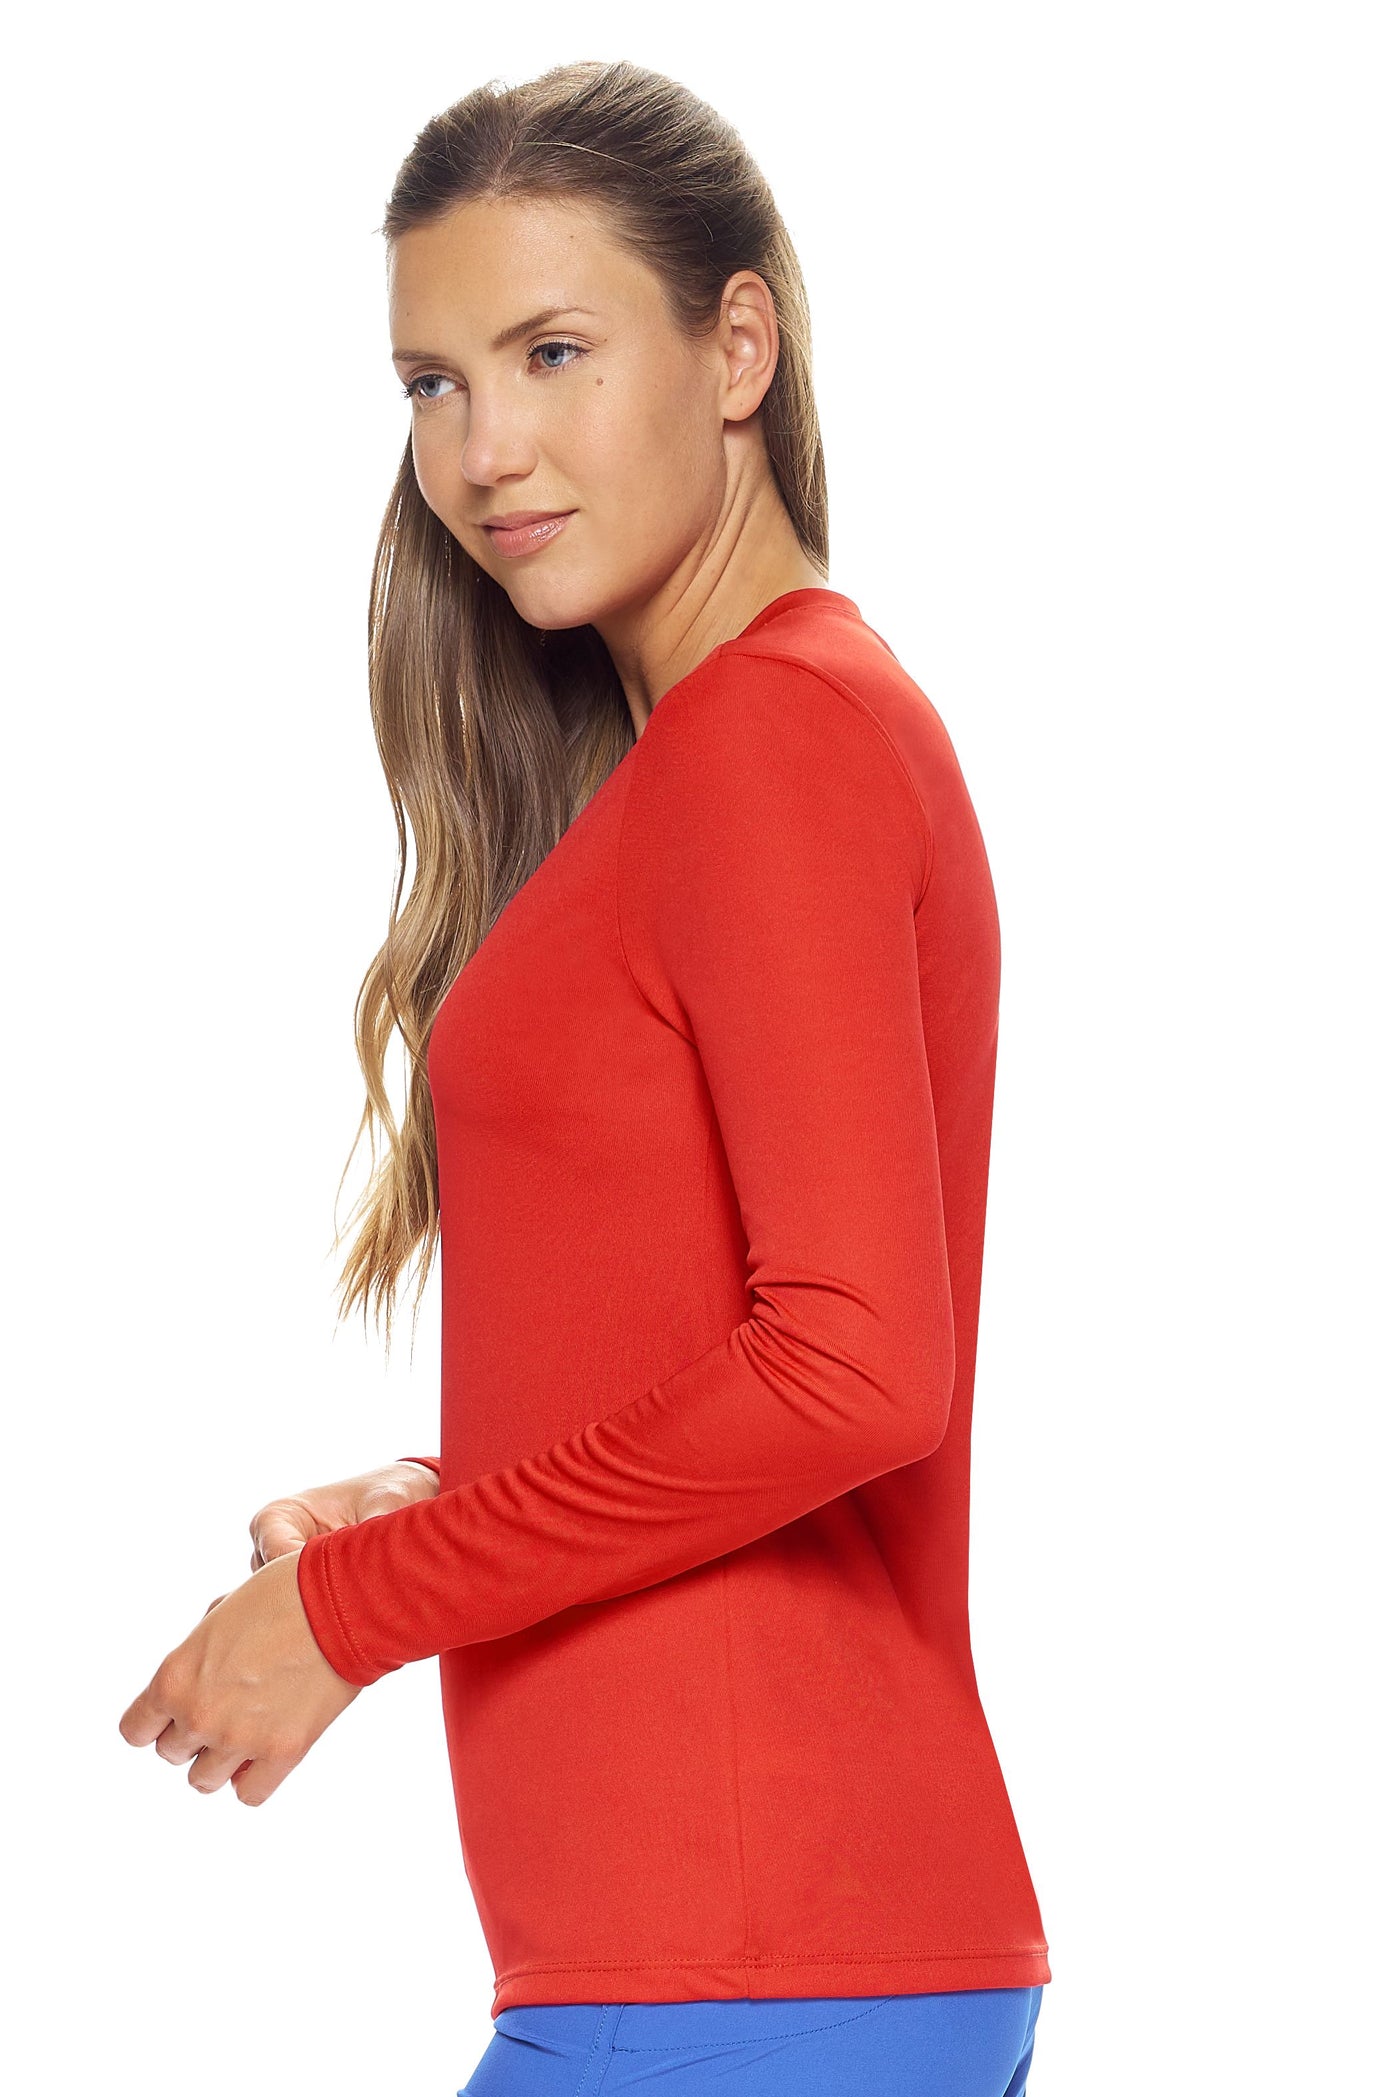 Expert Brand Retail Womens Activewear Womens Sportswear Made in USA Long Sleeve Tec Tee Runners Tee V Neck red 2#color_true-red